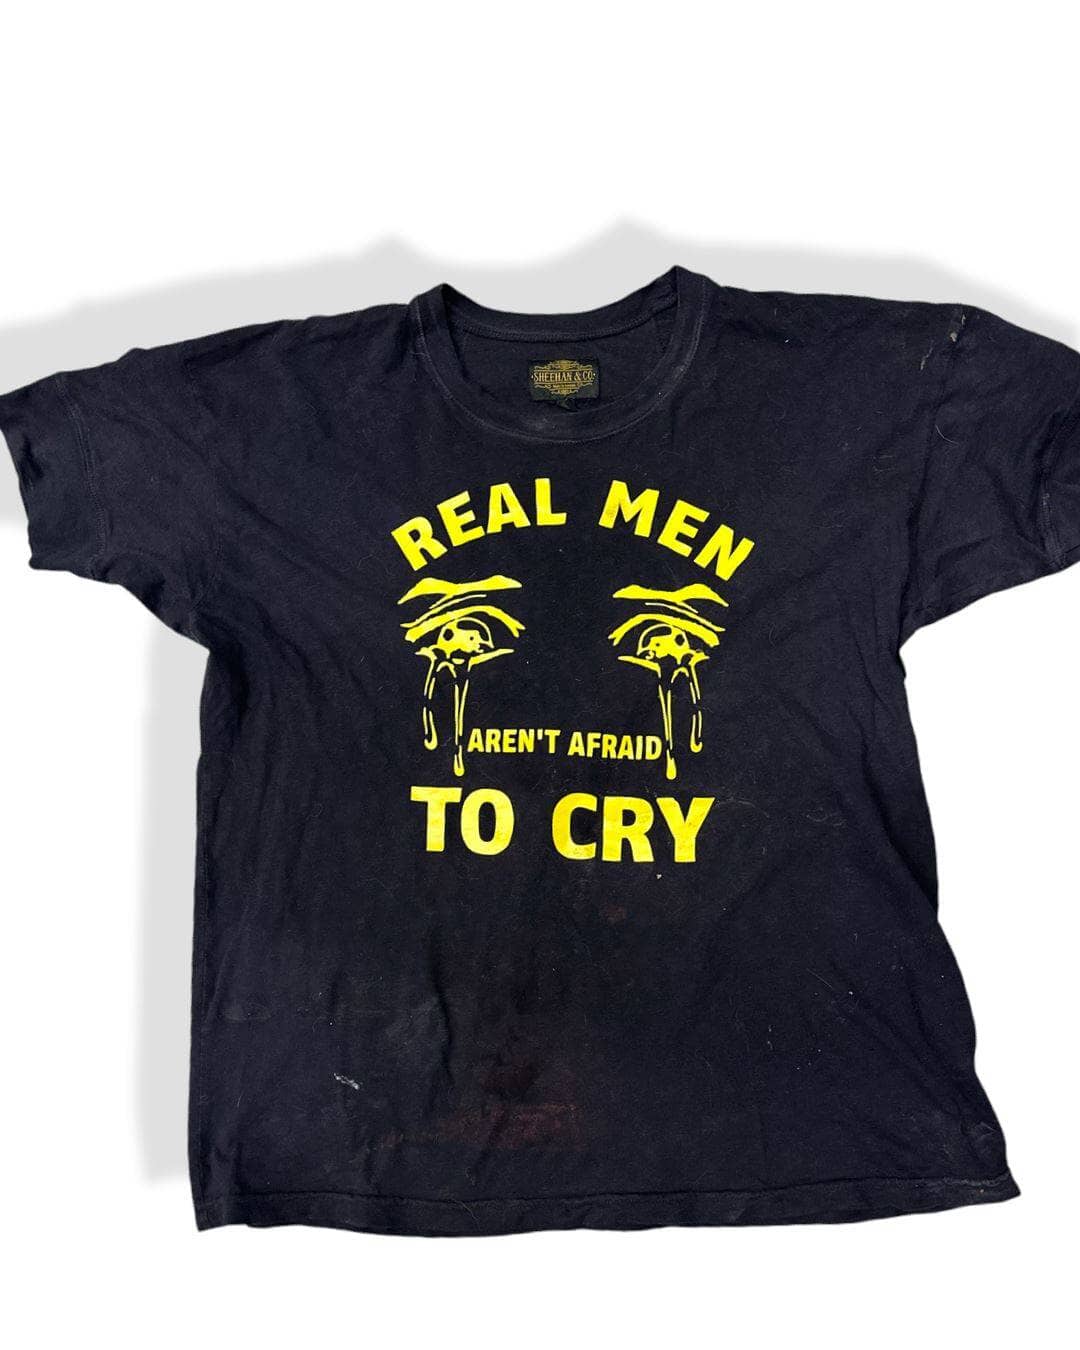 Real Men Aren't Afraid To Cry Statement Tee - Sheehan and Co.